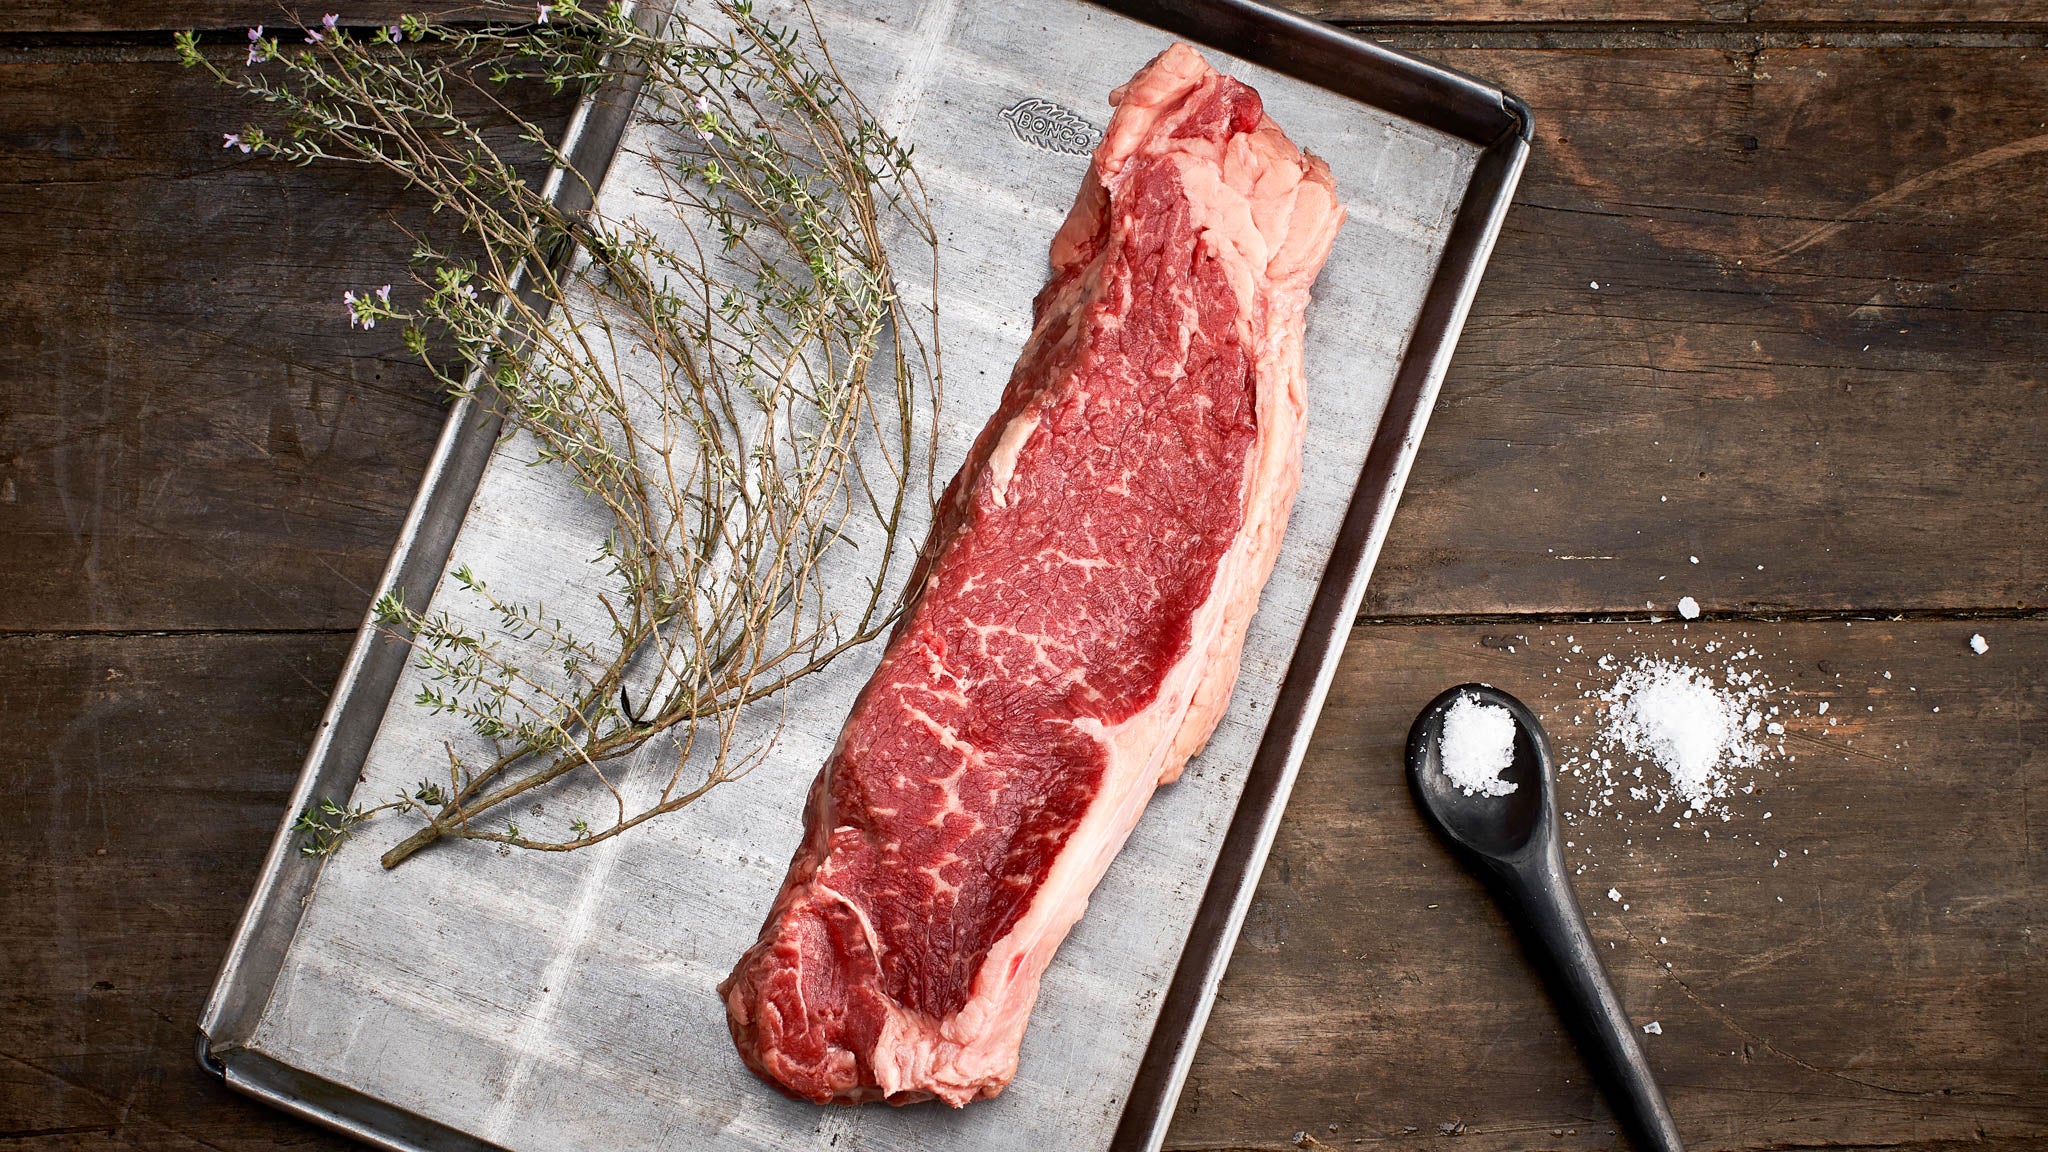 The Pre Difference: Why Should You Choose Pre Beef? - Pre